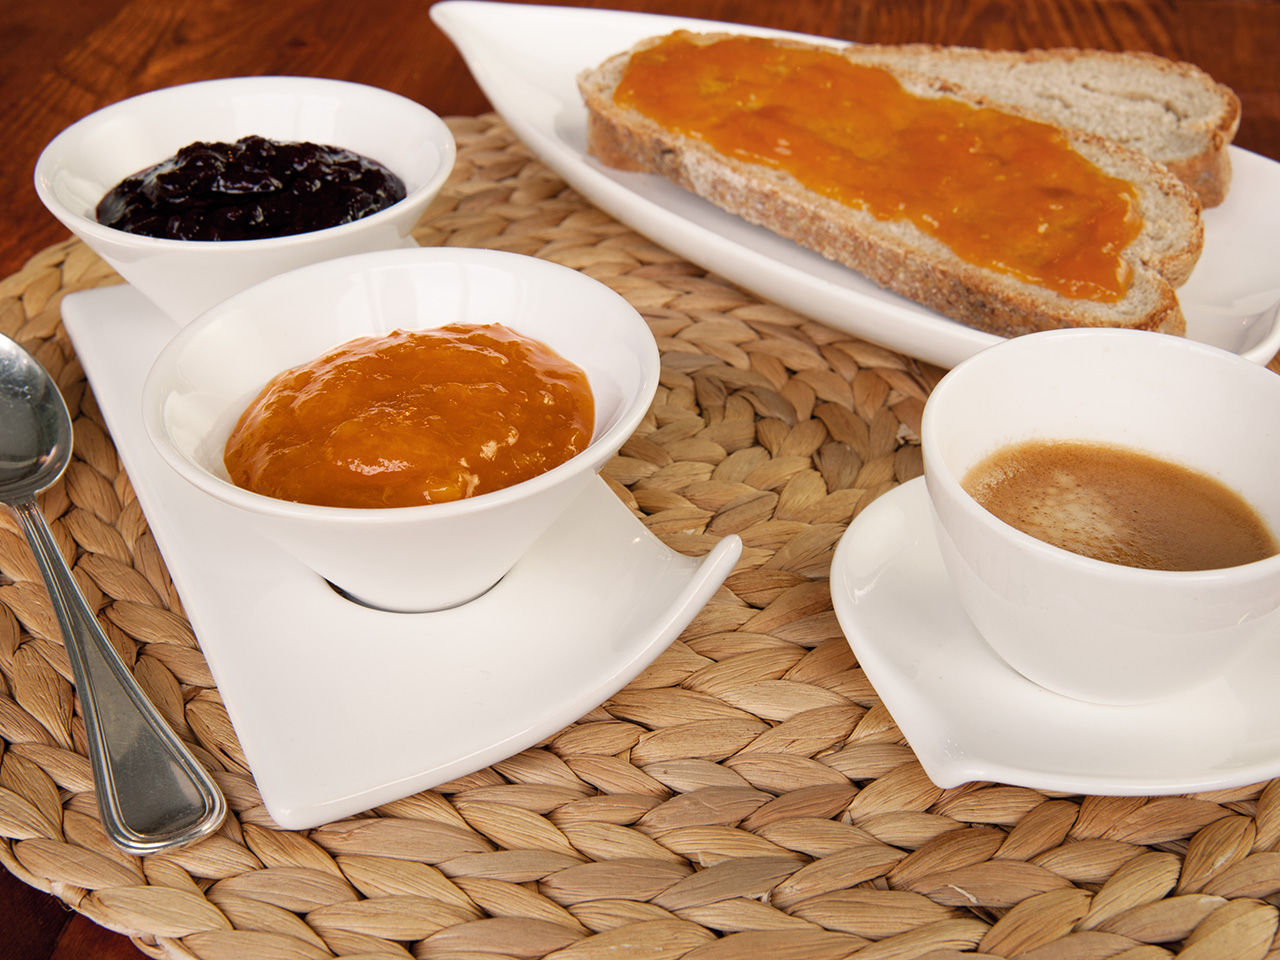 apricot spread and coffee